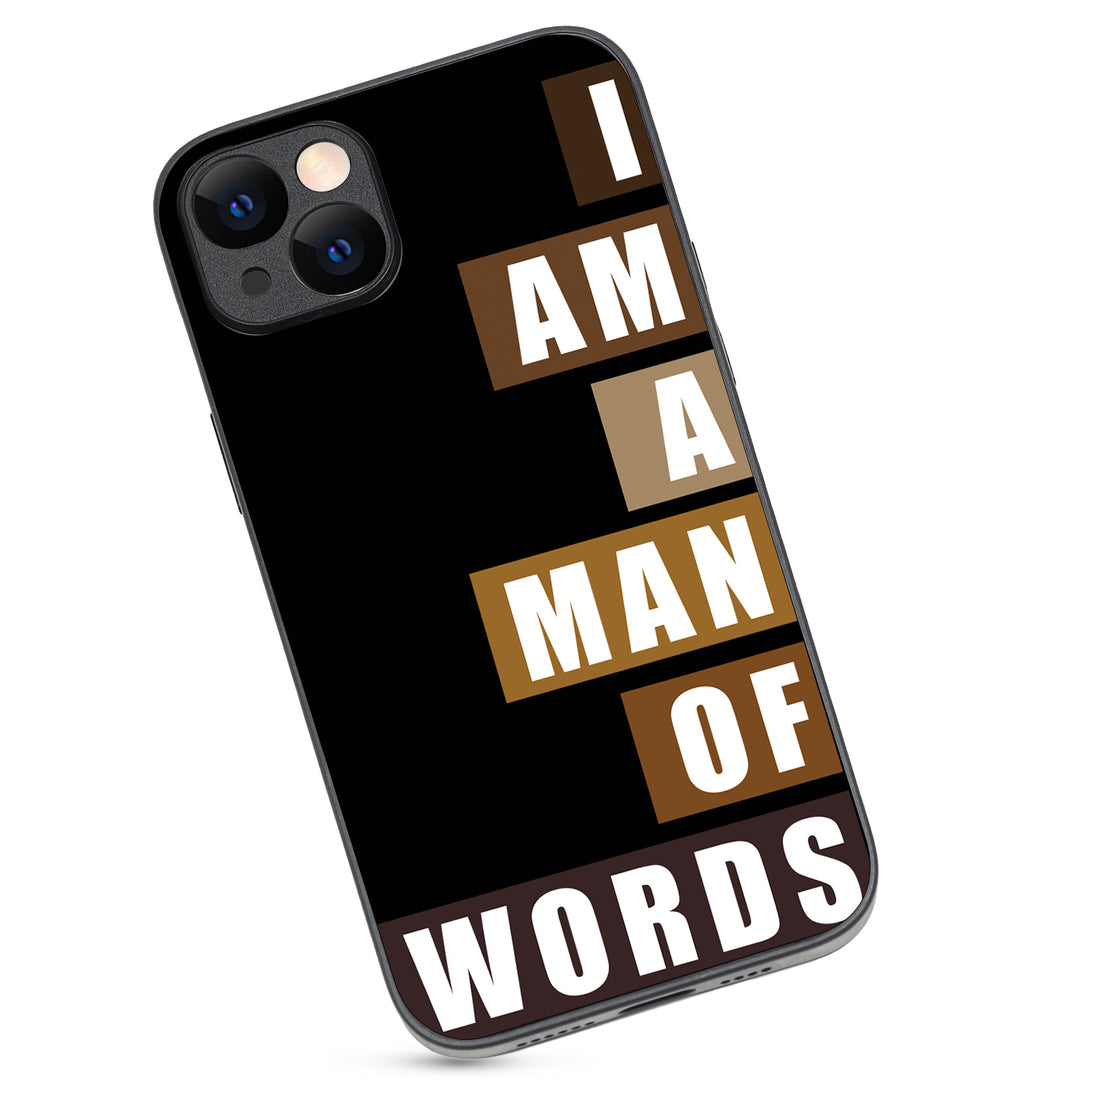 I Am A Man Of Words Motivational Quotes iPhone 14 Plus Case